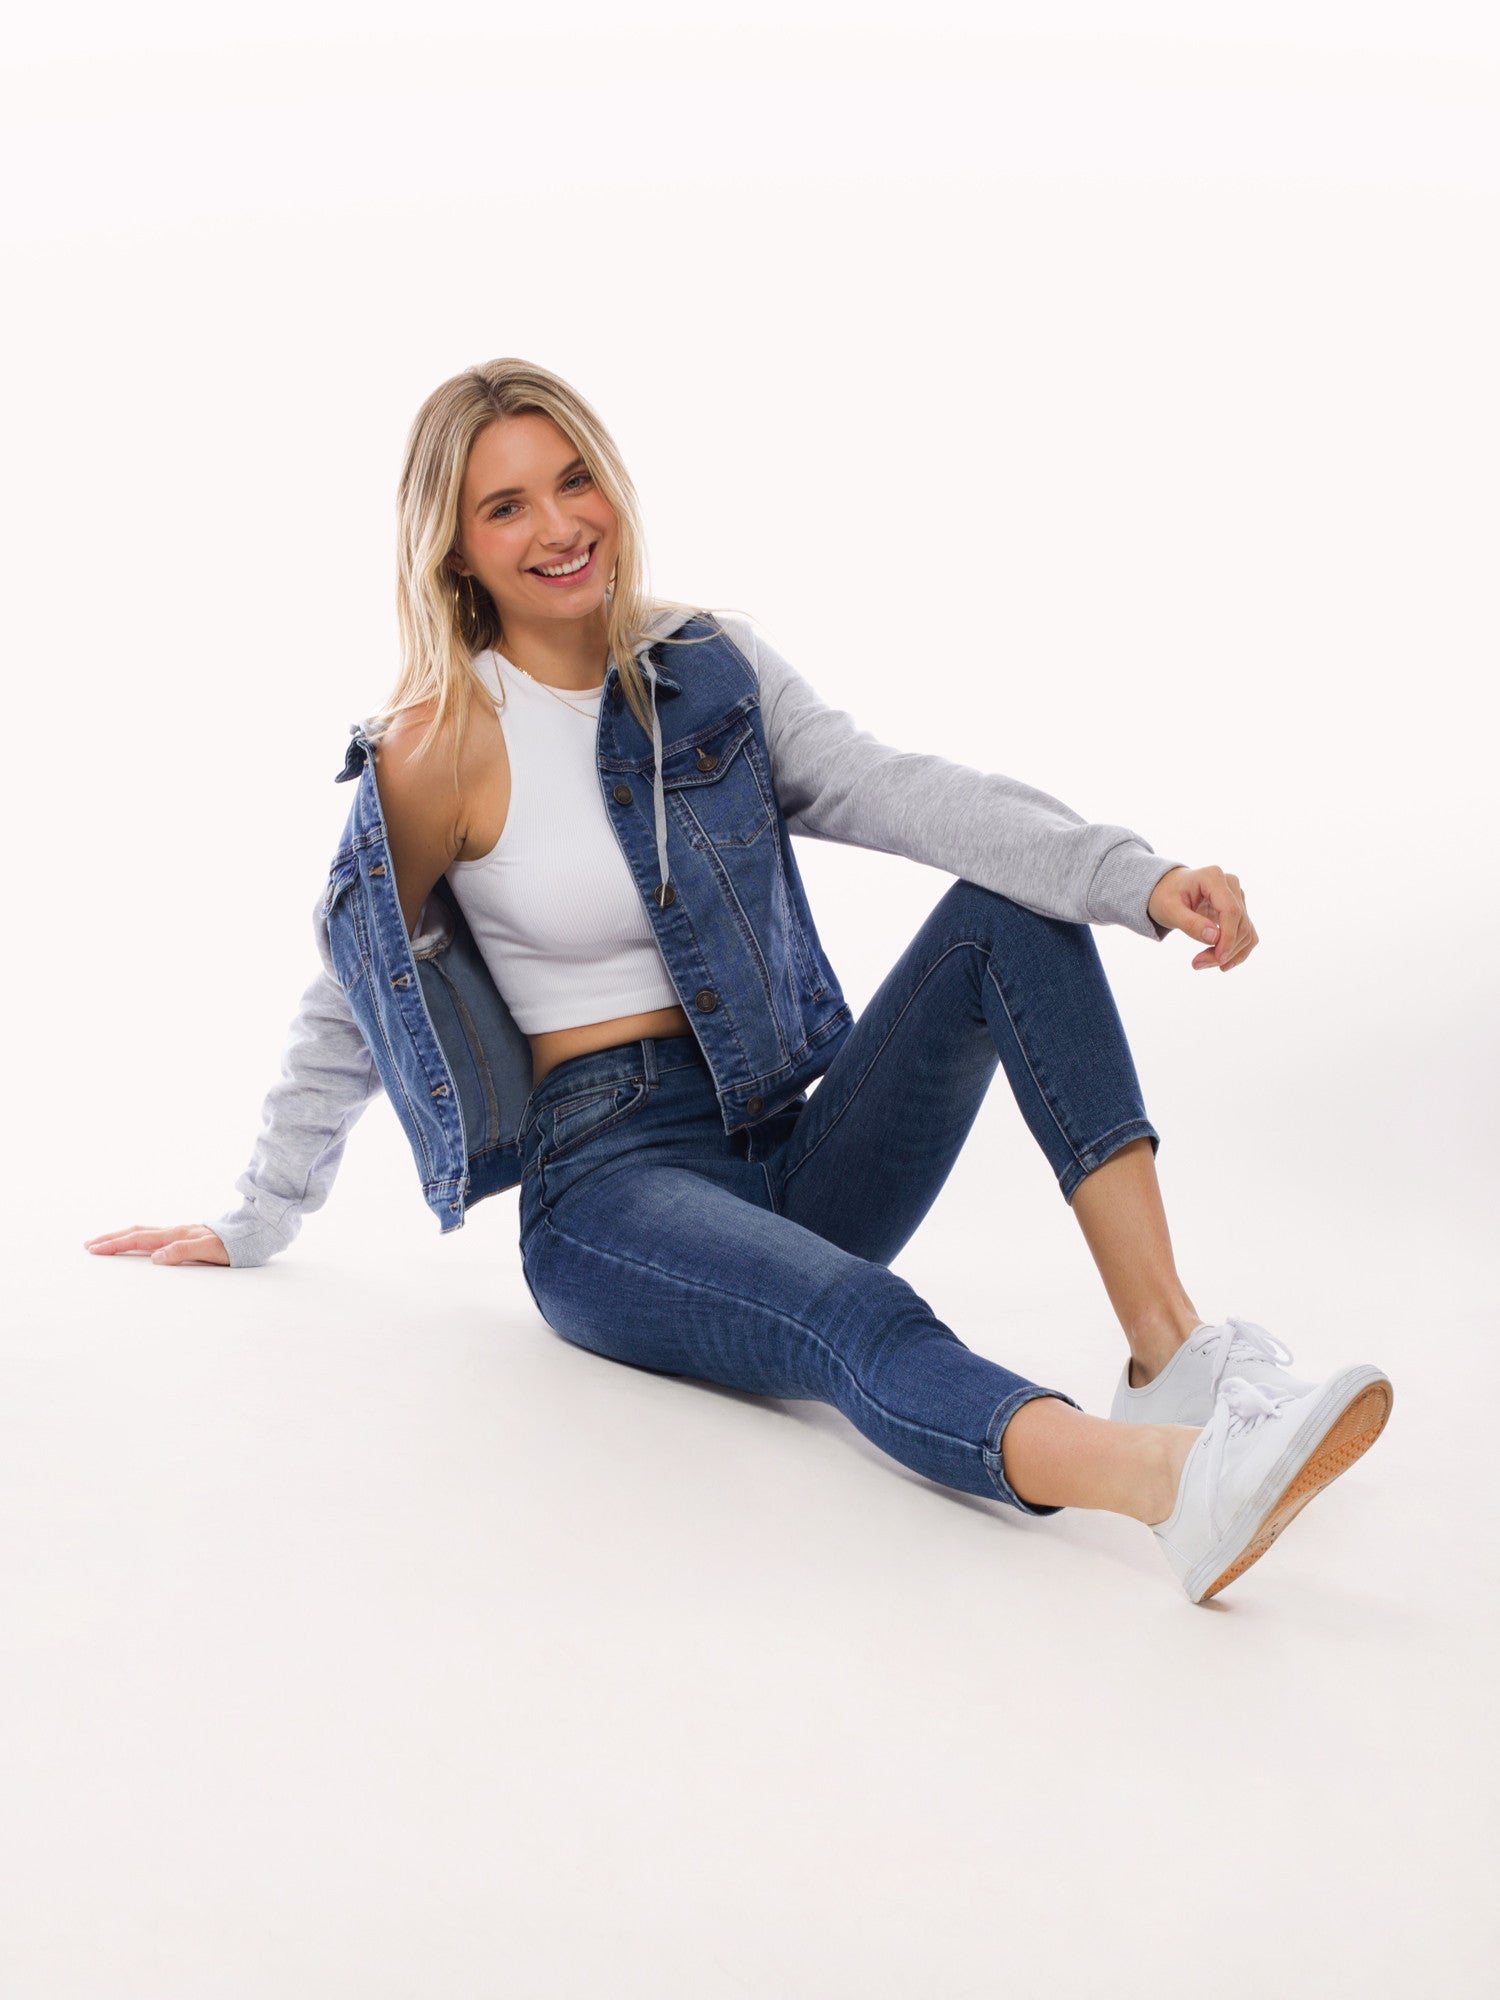 Classic Casual Hooded Denim Jacket